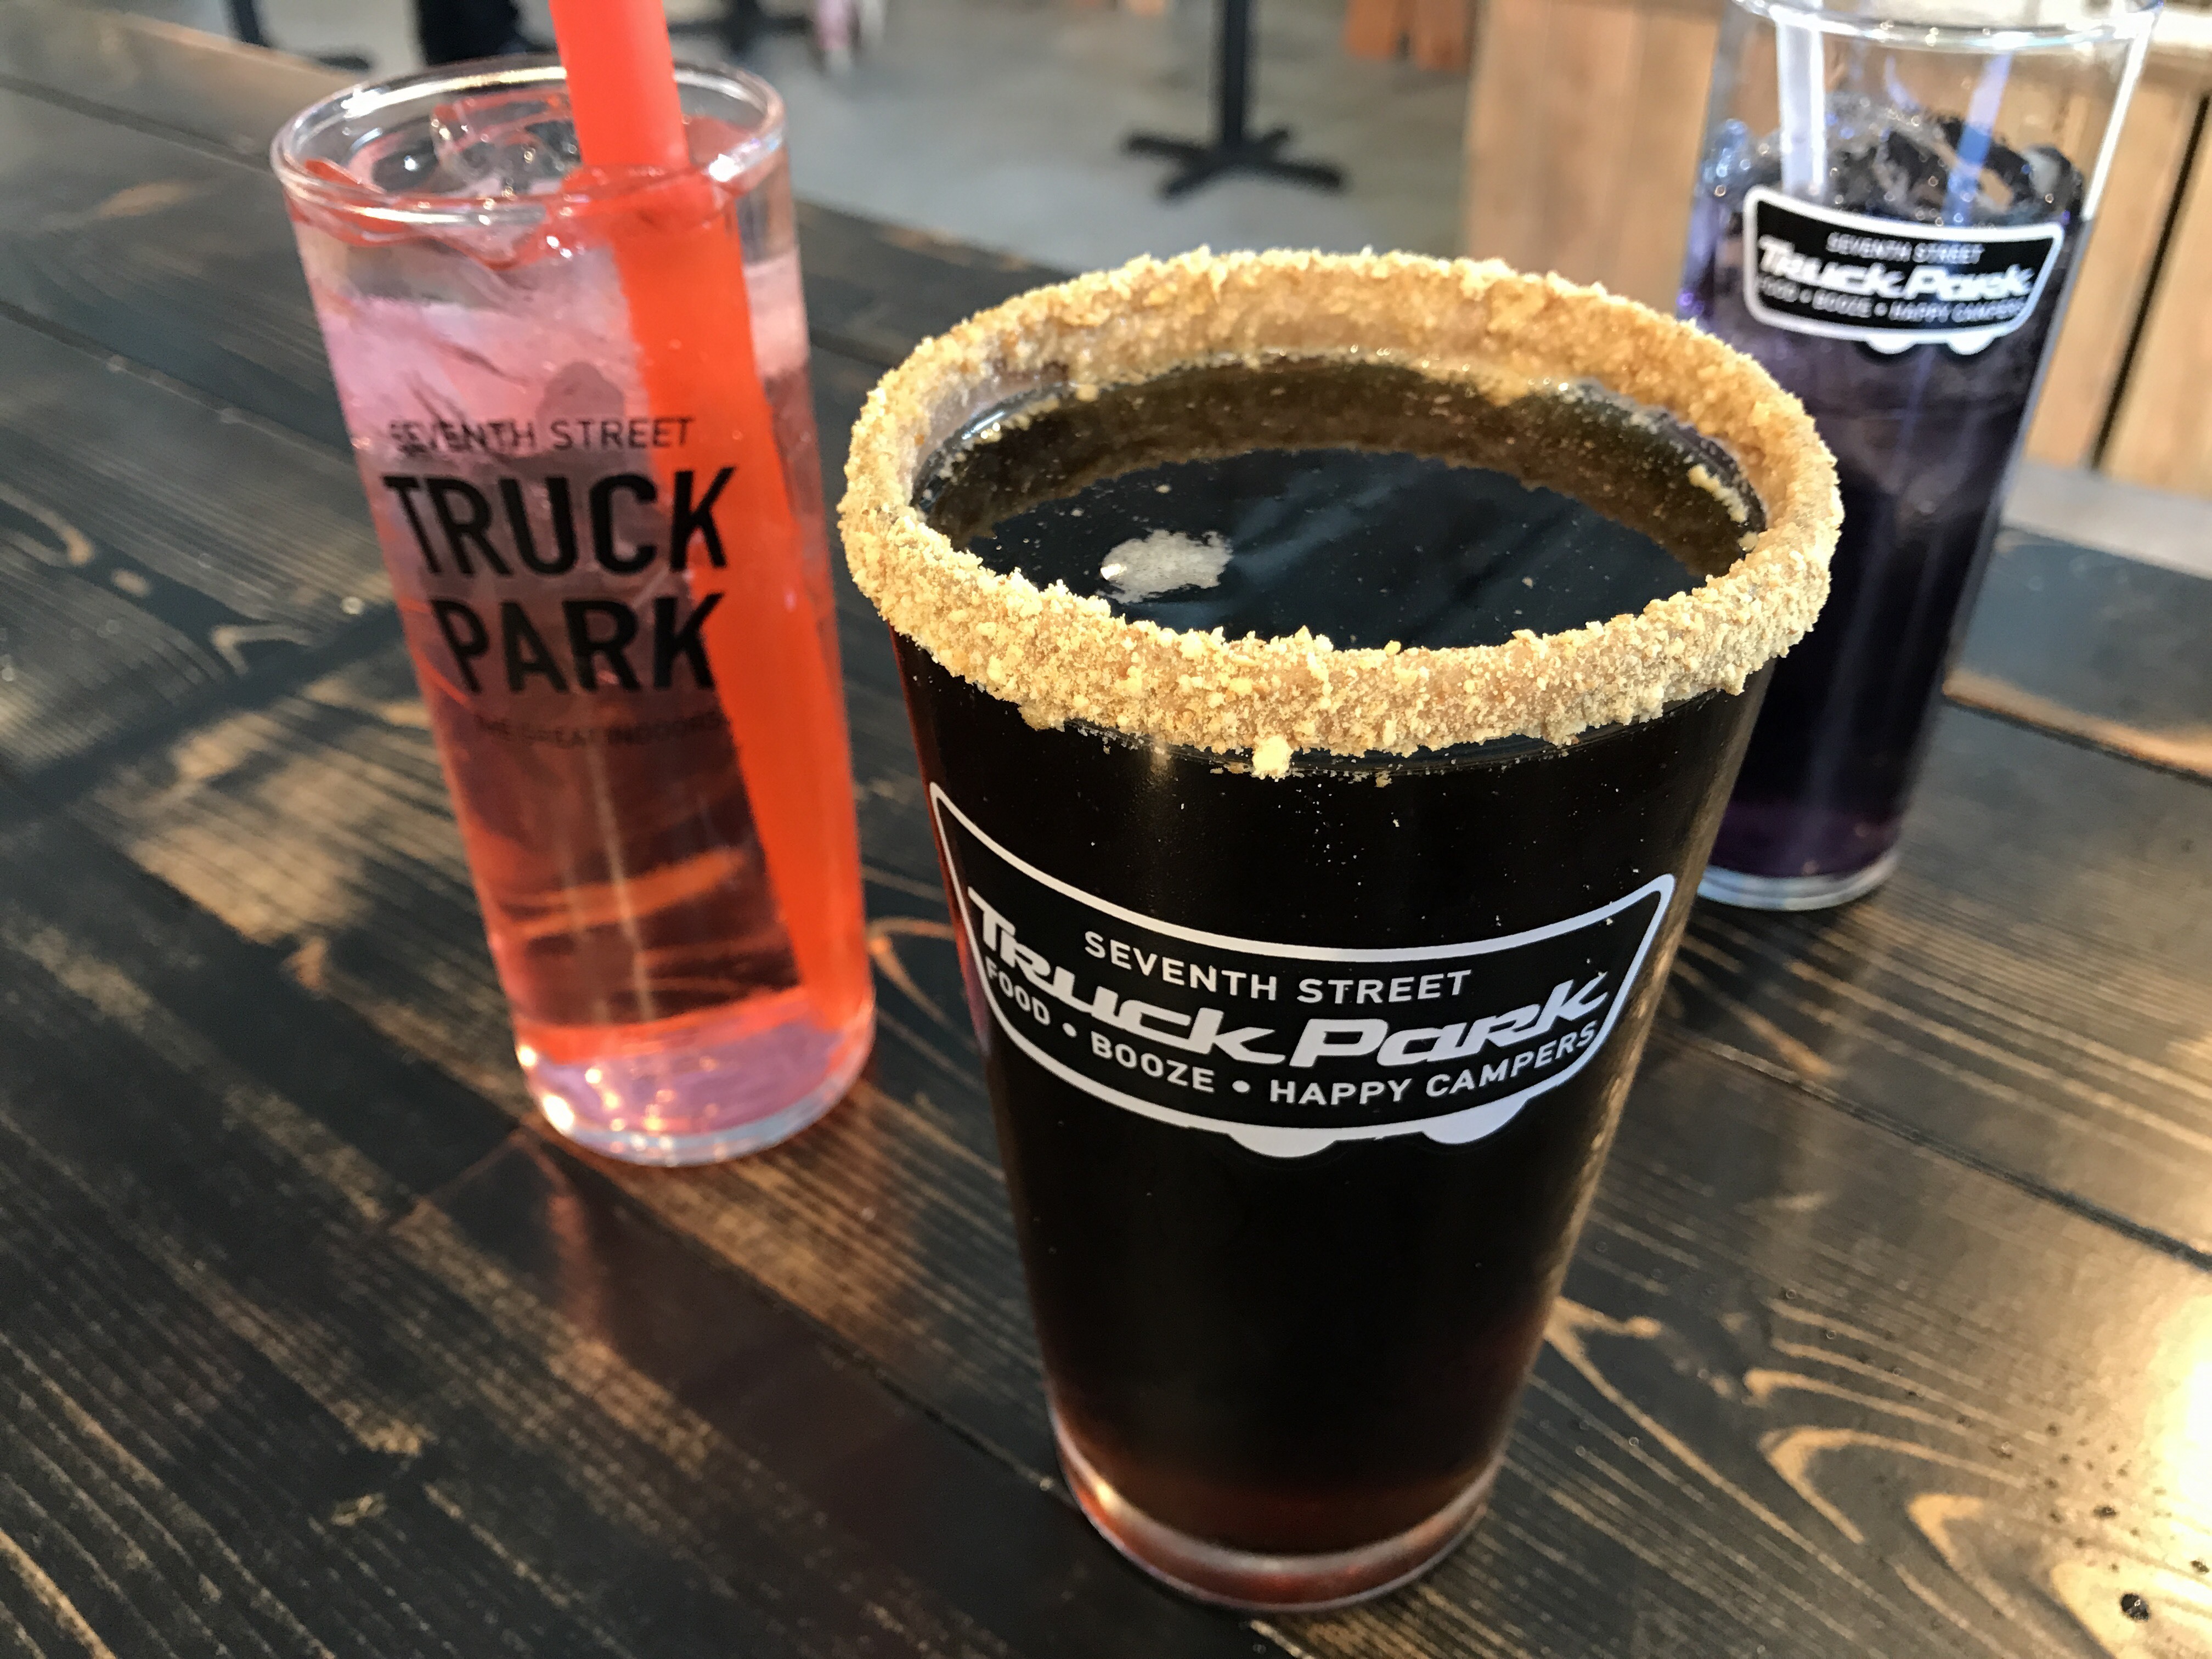 A s'mores themed beer at Truck Park.